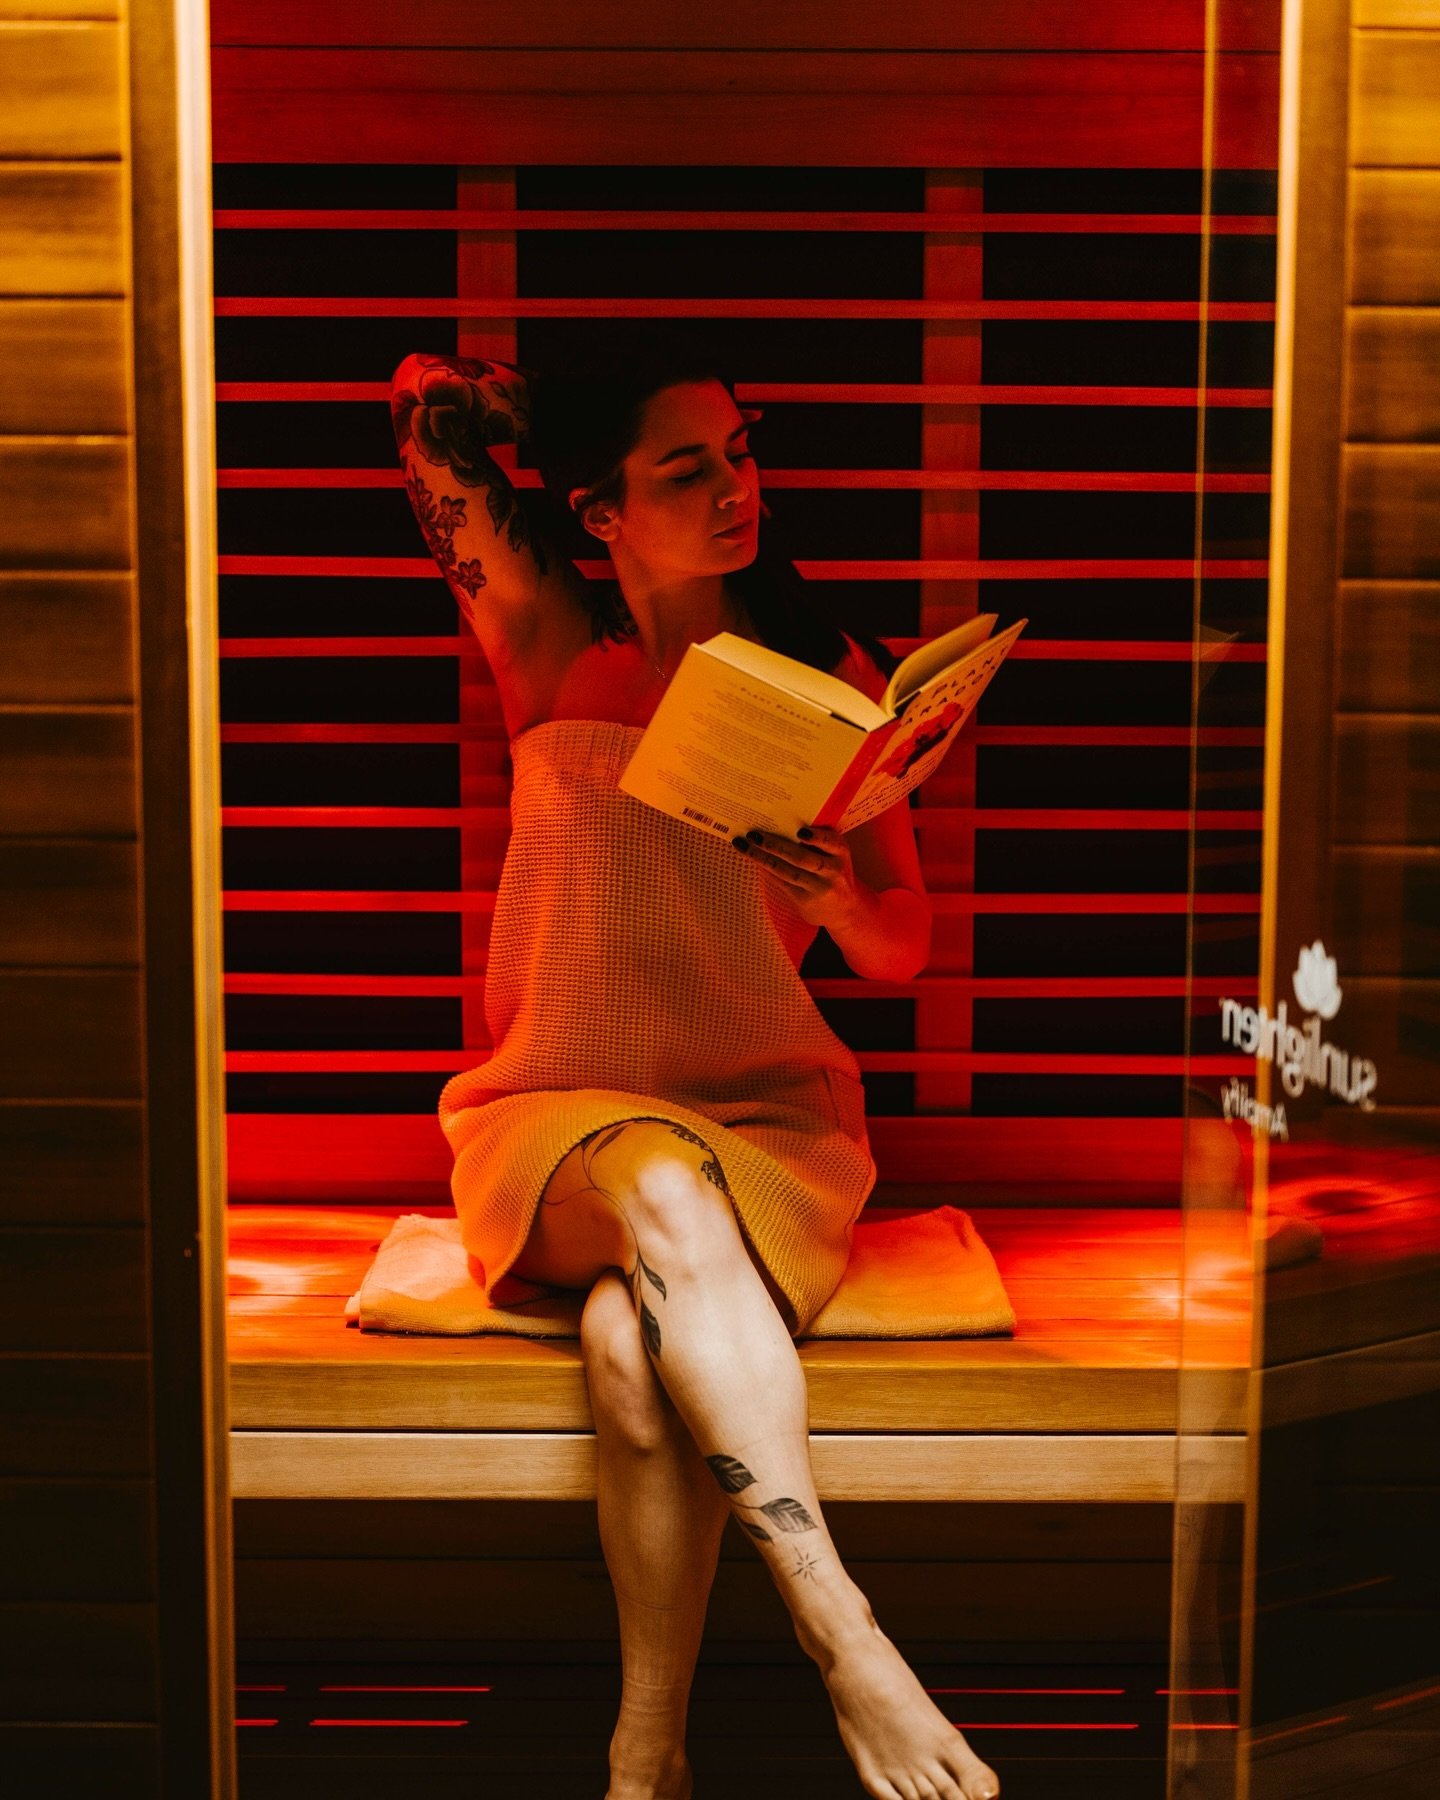 unlimited monthly sauna membership 🔥

enjoy unlimited use of our infrared sauna &amp; brand new shower for only $79/month ($700 value)

PS our monthly massage membership includes one free sauna session a month 💧($35 value)